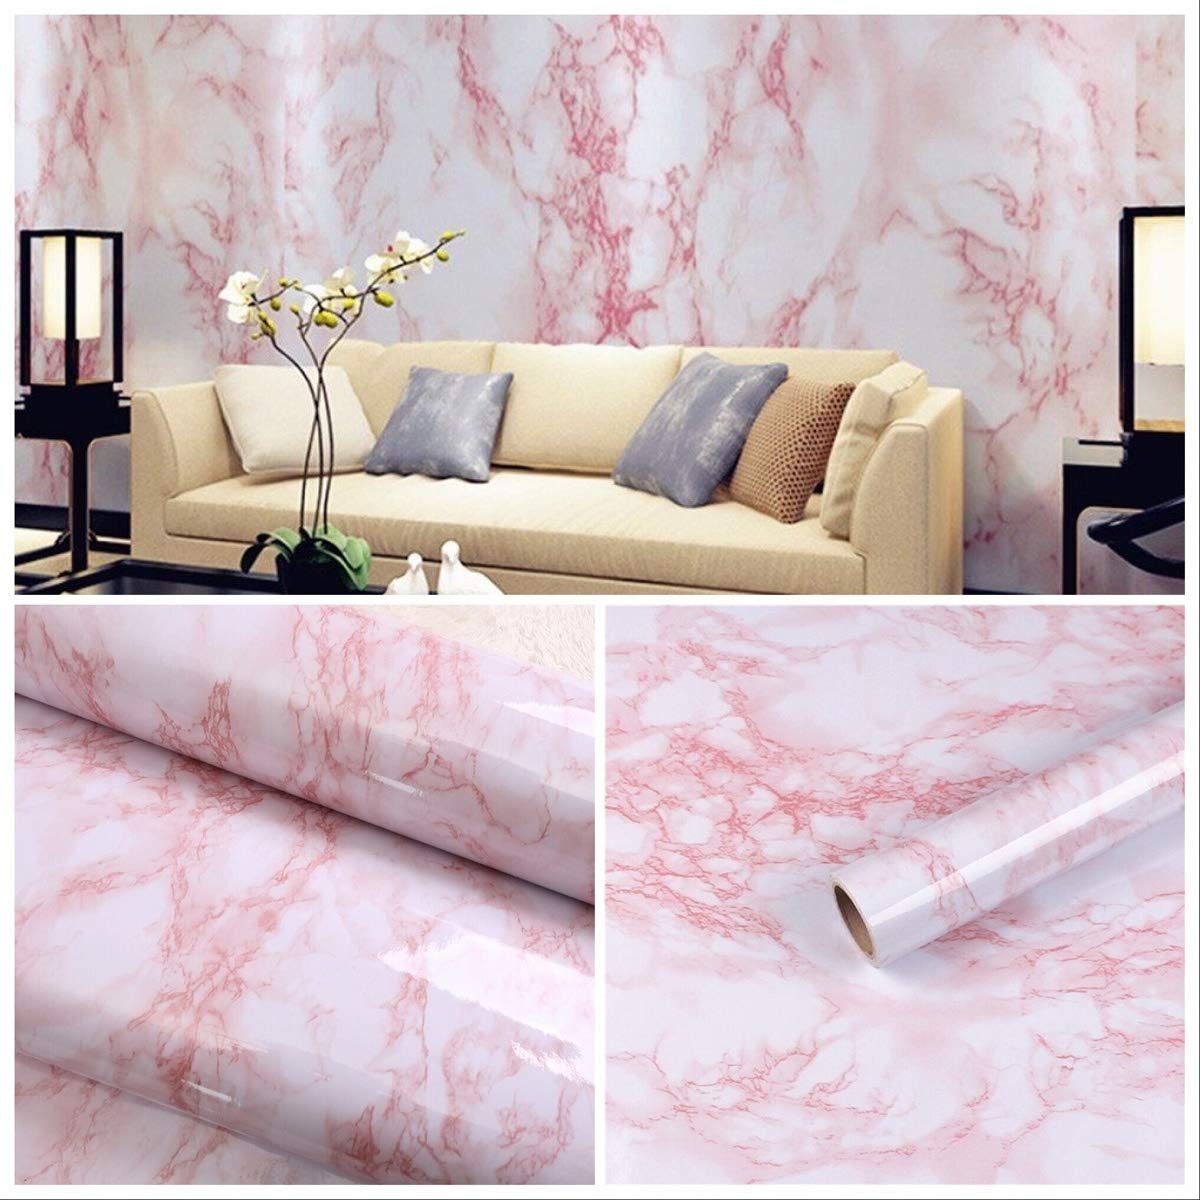 Wallpaper Borders - White And Pink Marble Wall - HD Wallpaper 